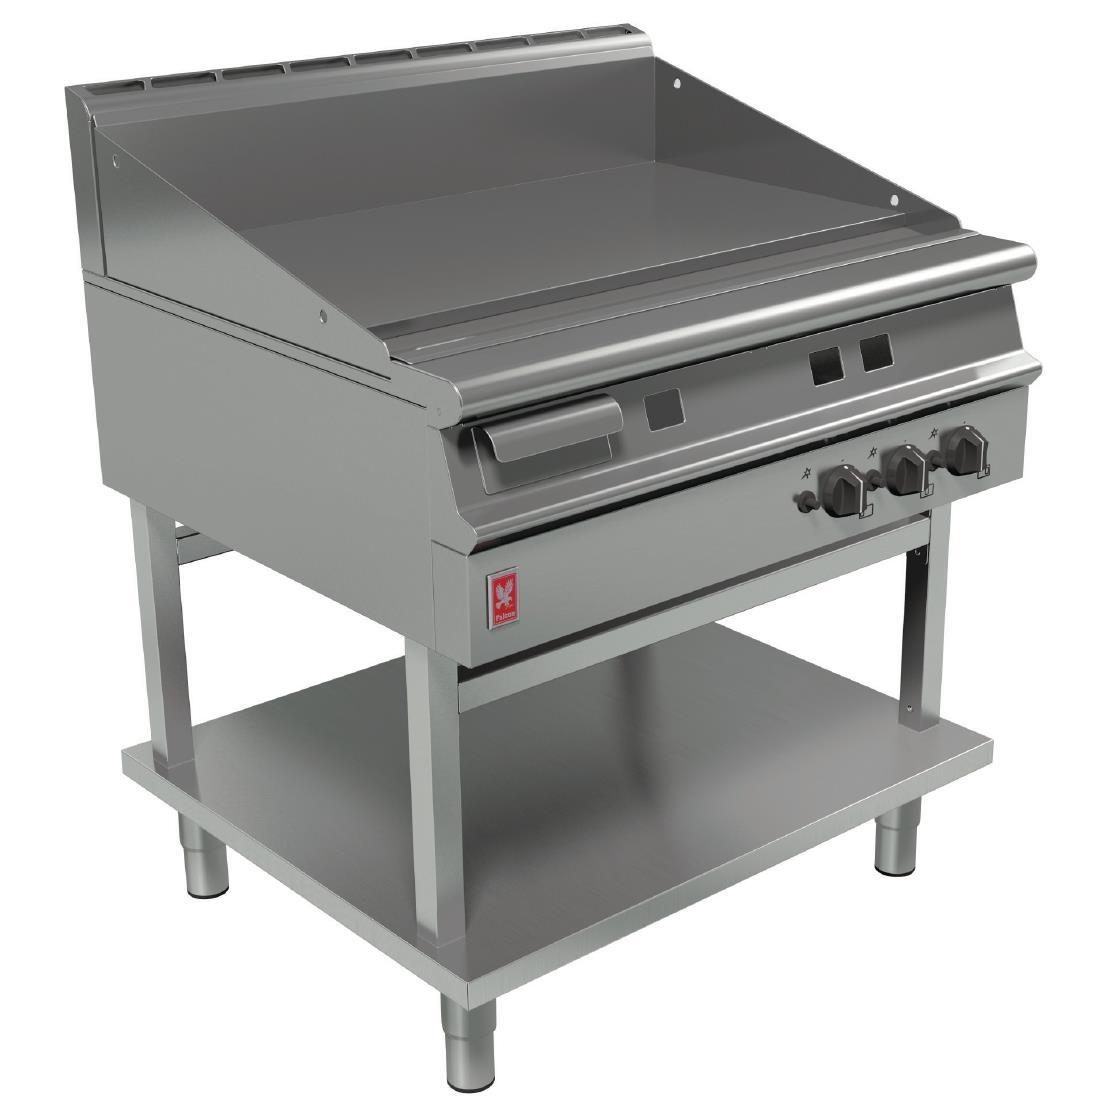 Falcon Dominator Plus 900mm Wide Smooth LPG Griddle on Fixed Stand G3941 - GP048-P  - 1